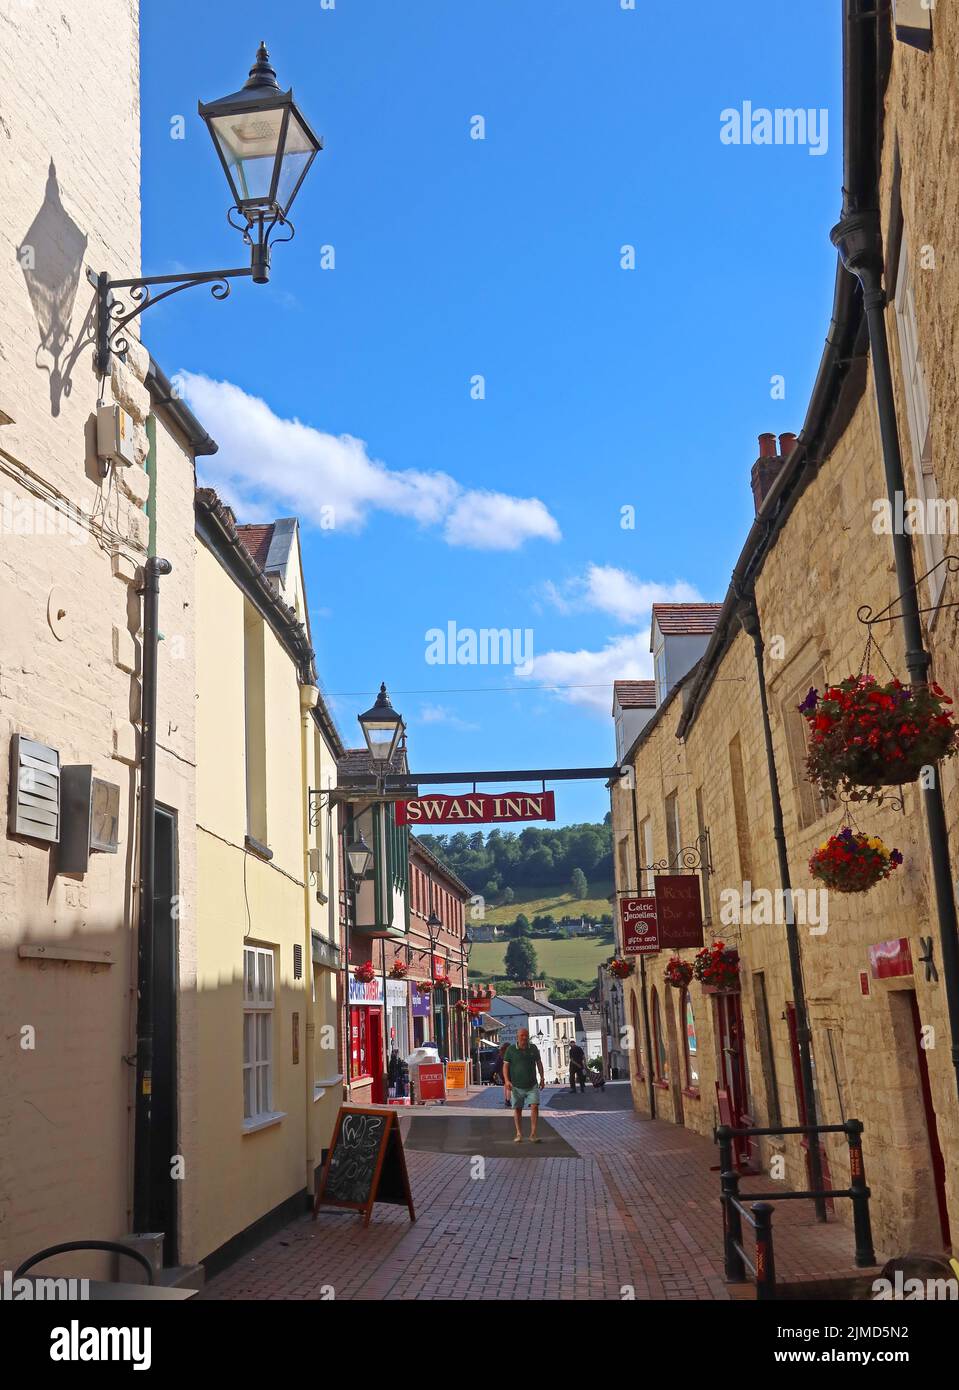 The Swan Inn, Union St, Stroud, Cotswolds, Gloucestershire, INGHILTERRA, REGNO UNITO, GL5 2HF Foto Stock